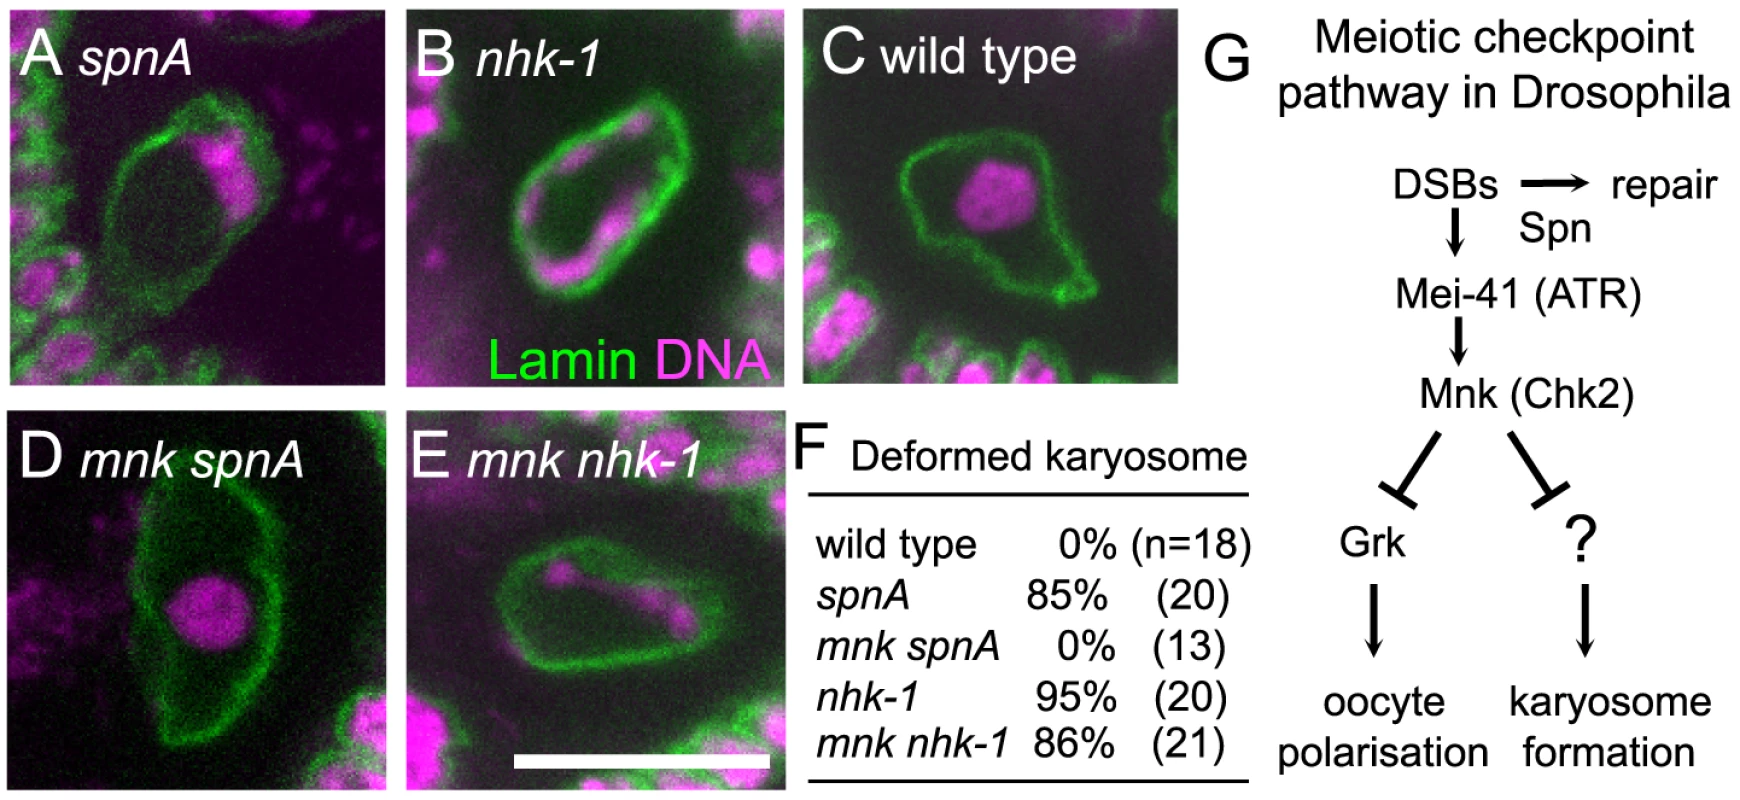 Inactivation of the meiotic checkpoint did not suppress <i>nhk-1</i> karyosome defects.